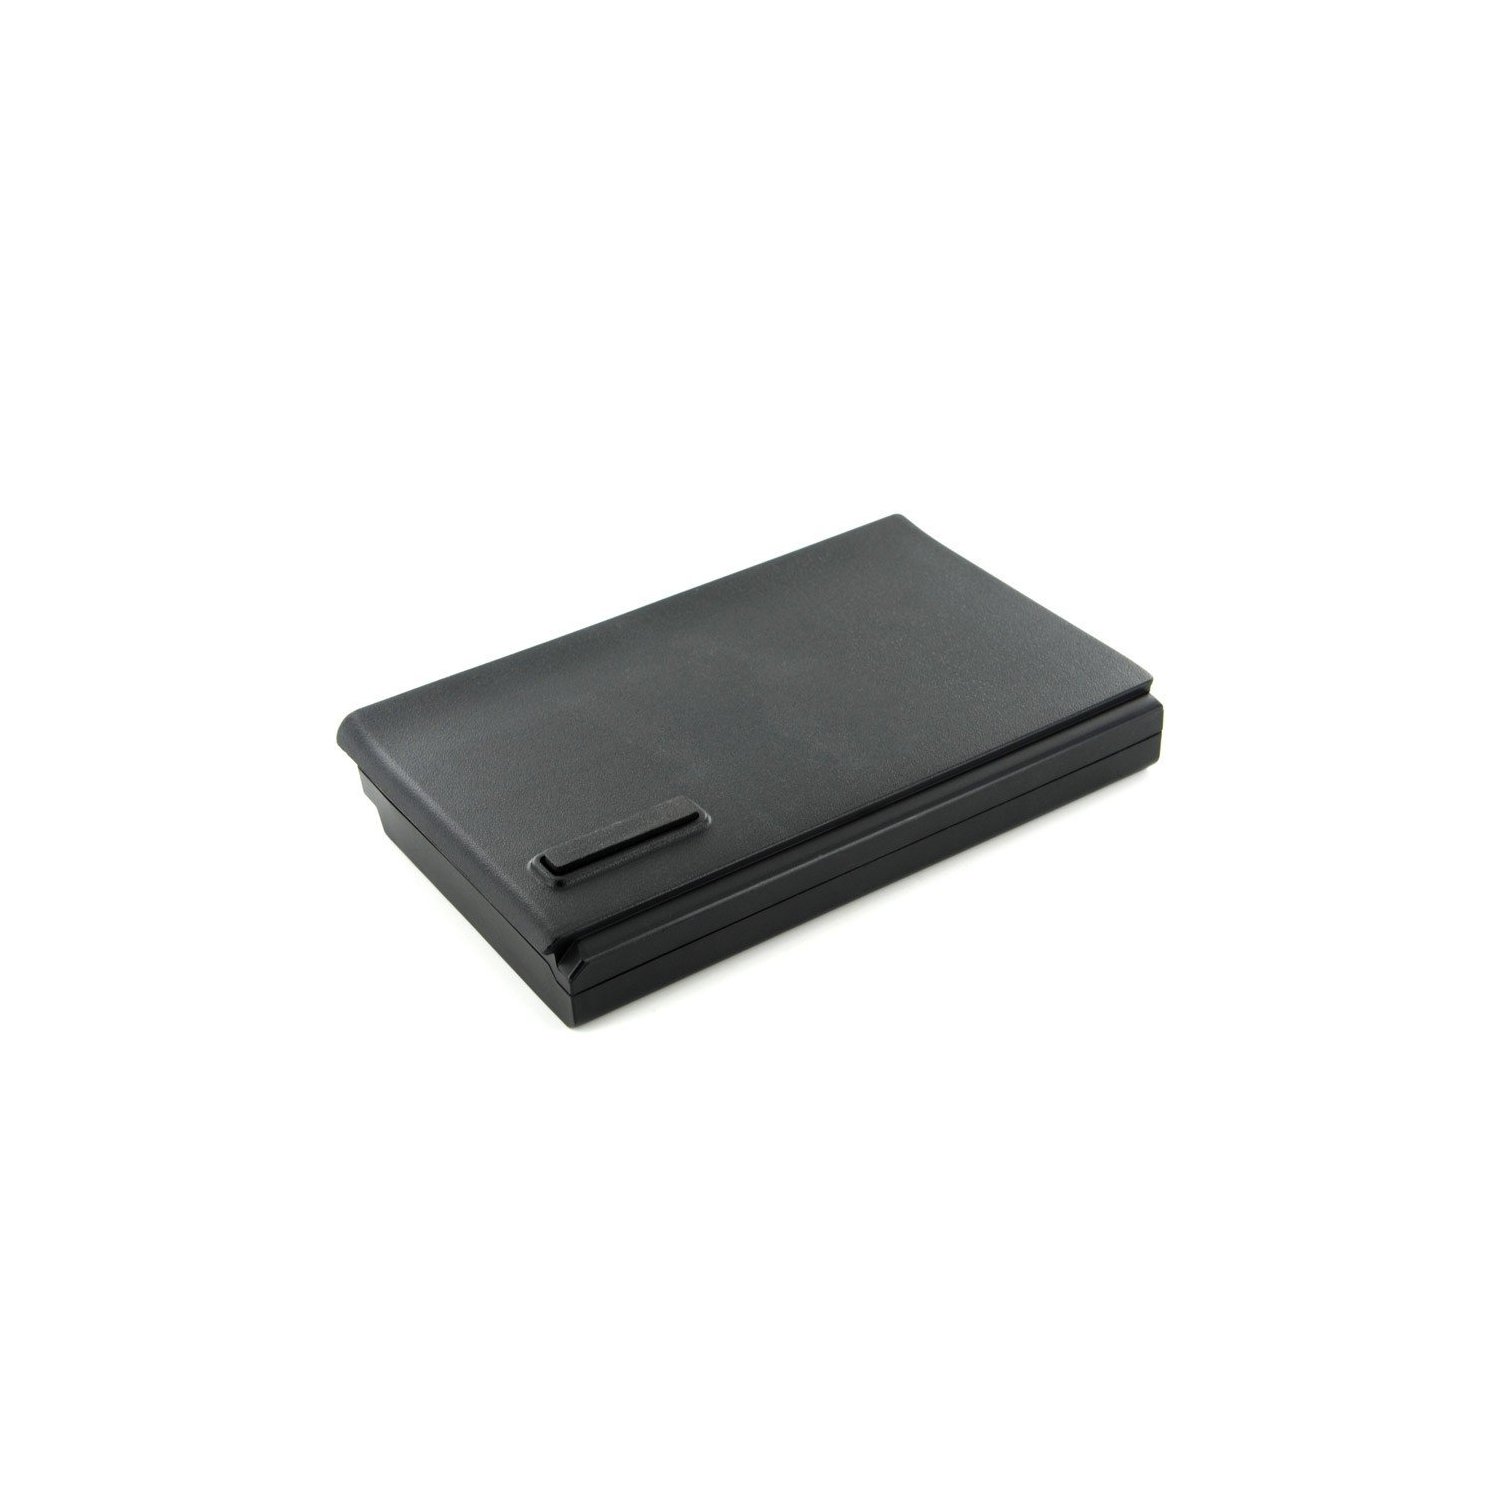 Acer Extensa 5635-6 Cell: New Laptop Replacement Battery for ACER EXTENSA 5635-6011,11.1v,6 cells